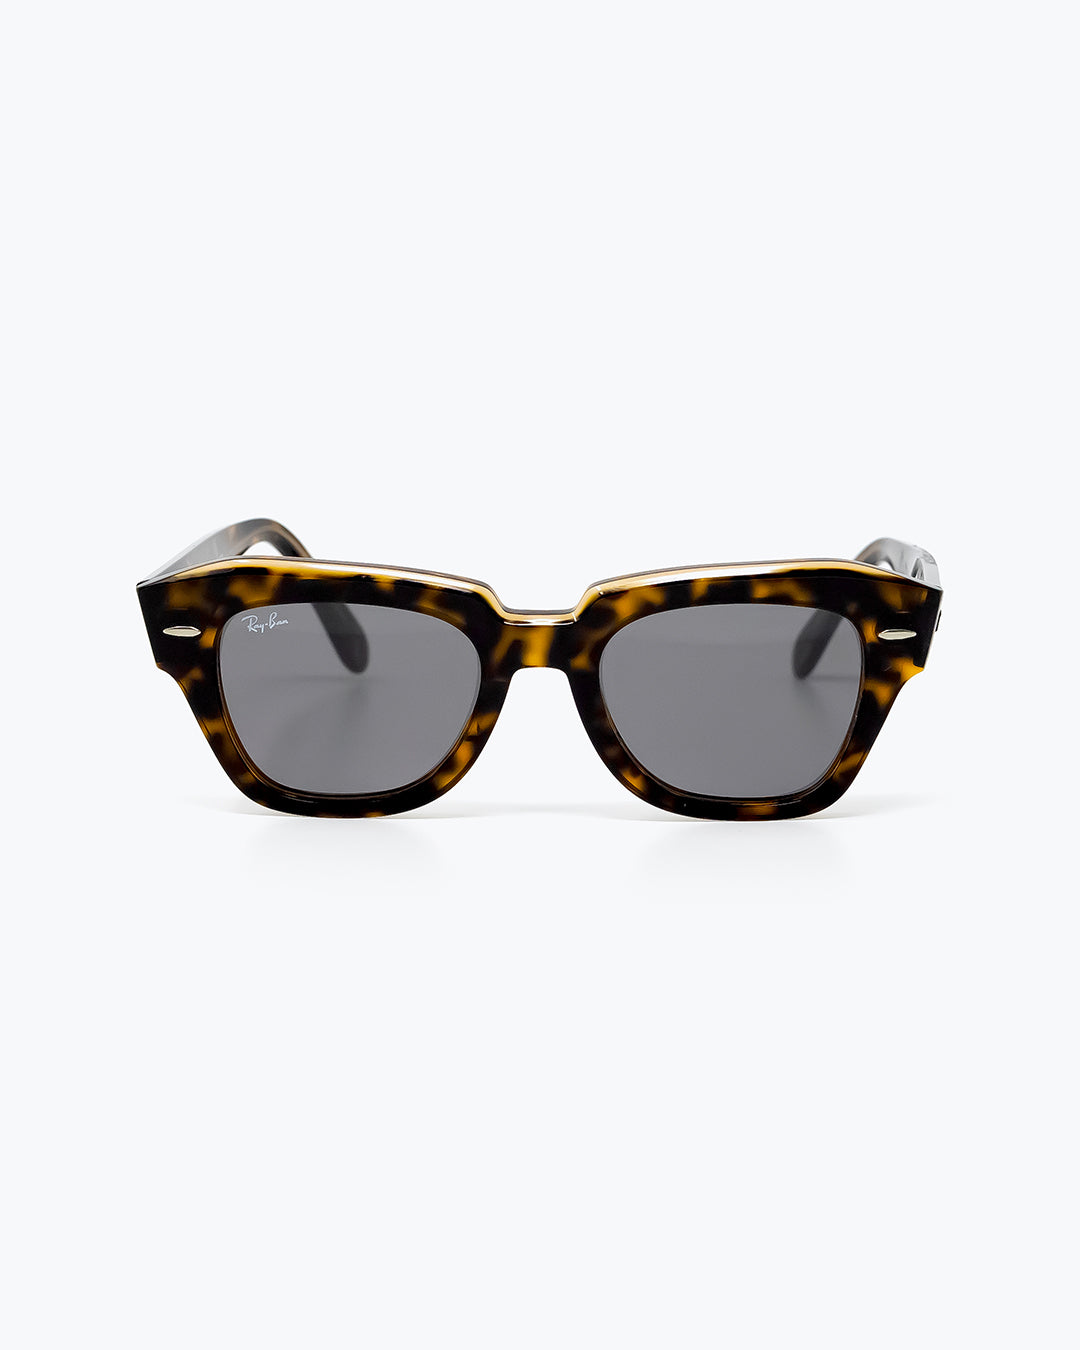 Ray Ban State Street - Model RB2186